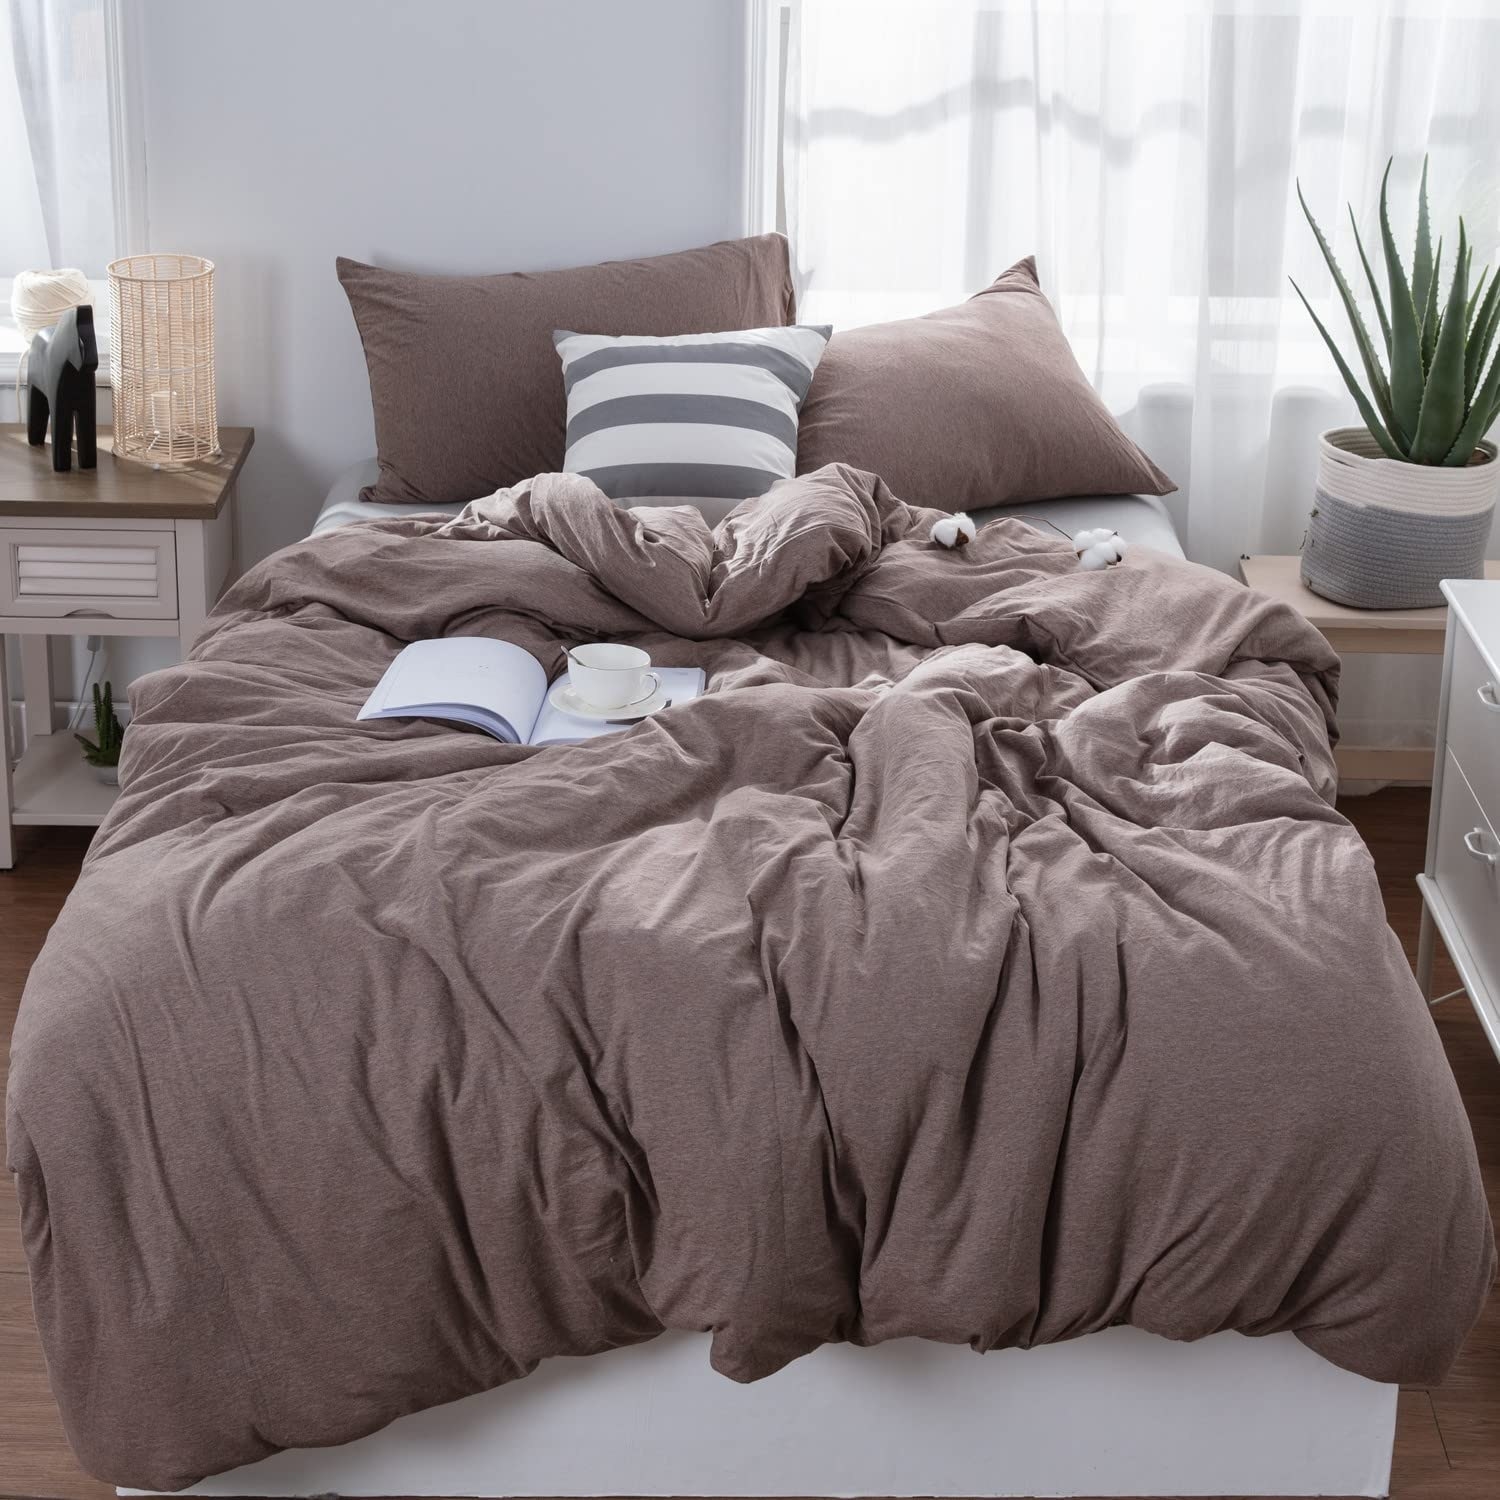 a stylish bed made up with the cotton jersey duvet cover and pillowcases